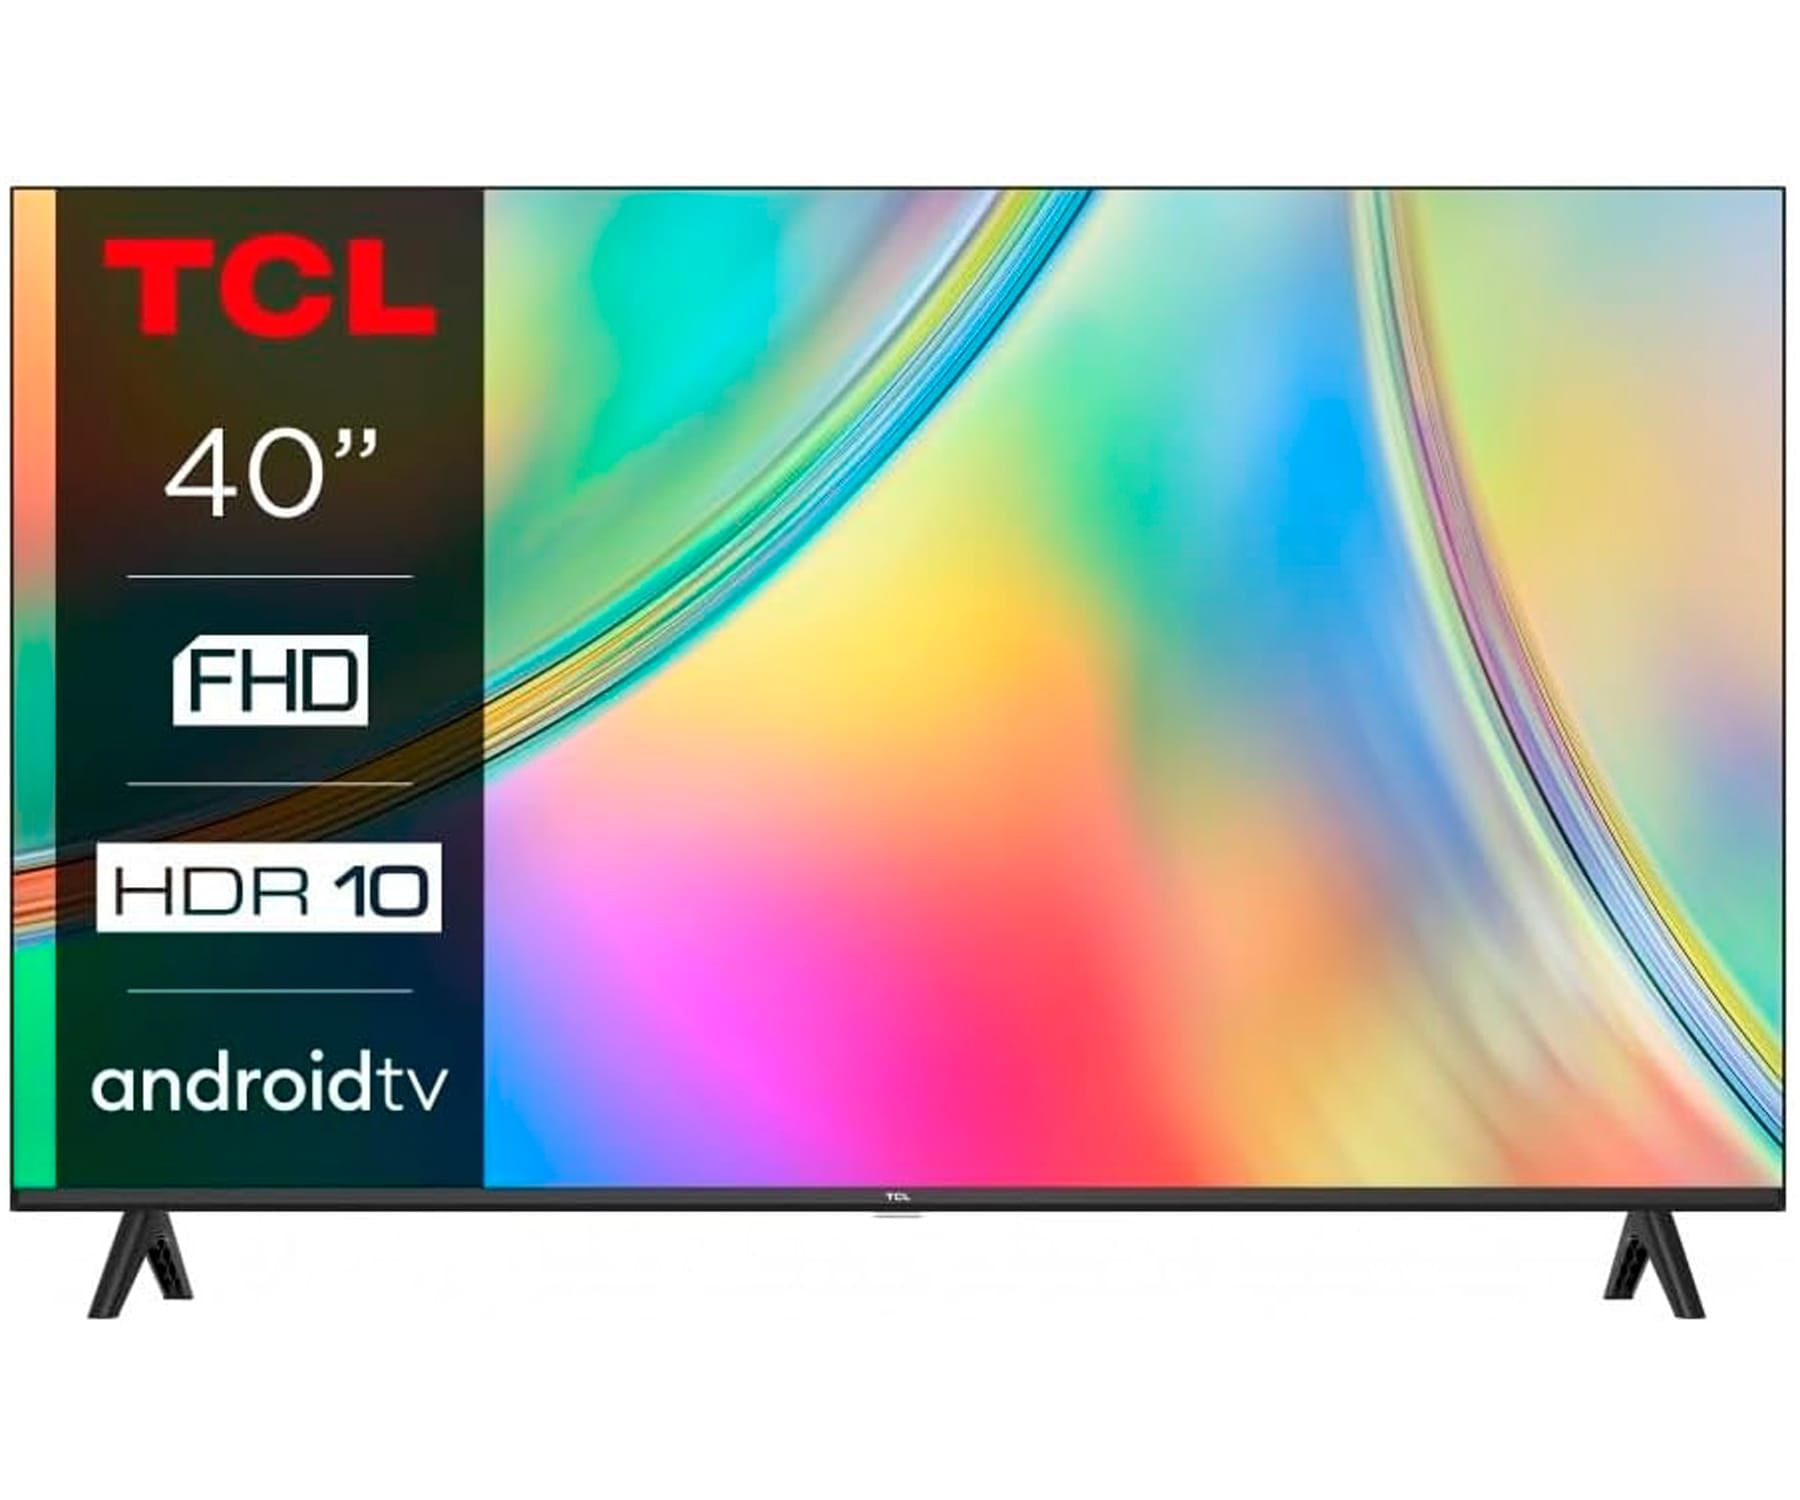 Televisor 40" TCL Full HD 40S5400A Android tv